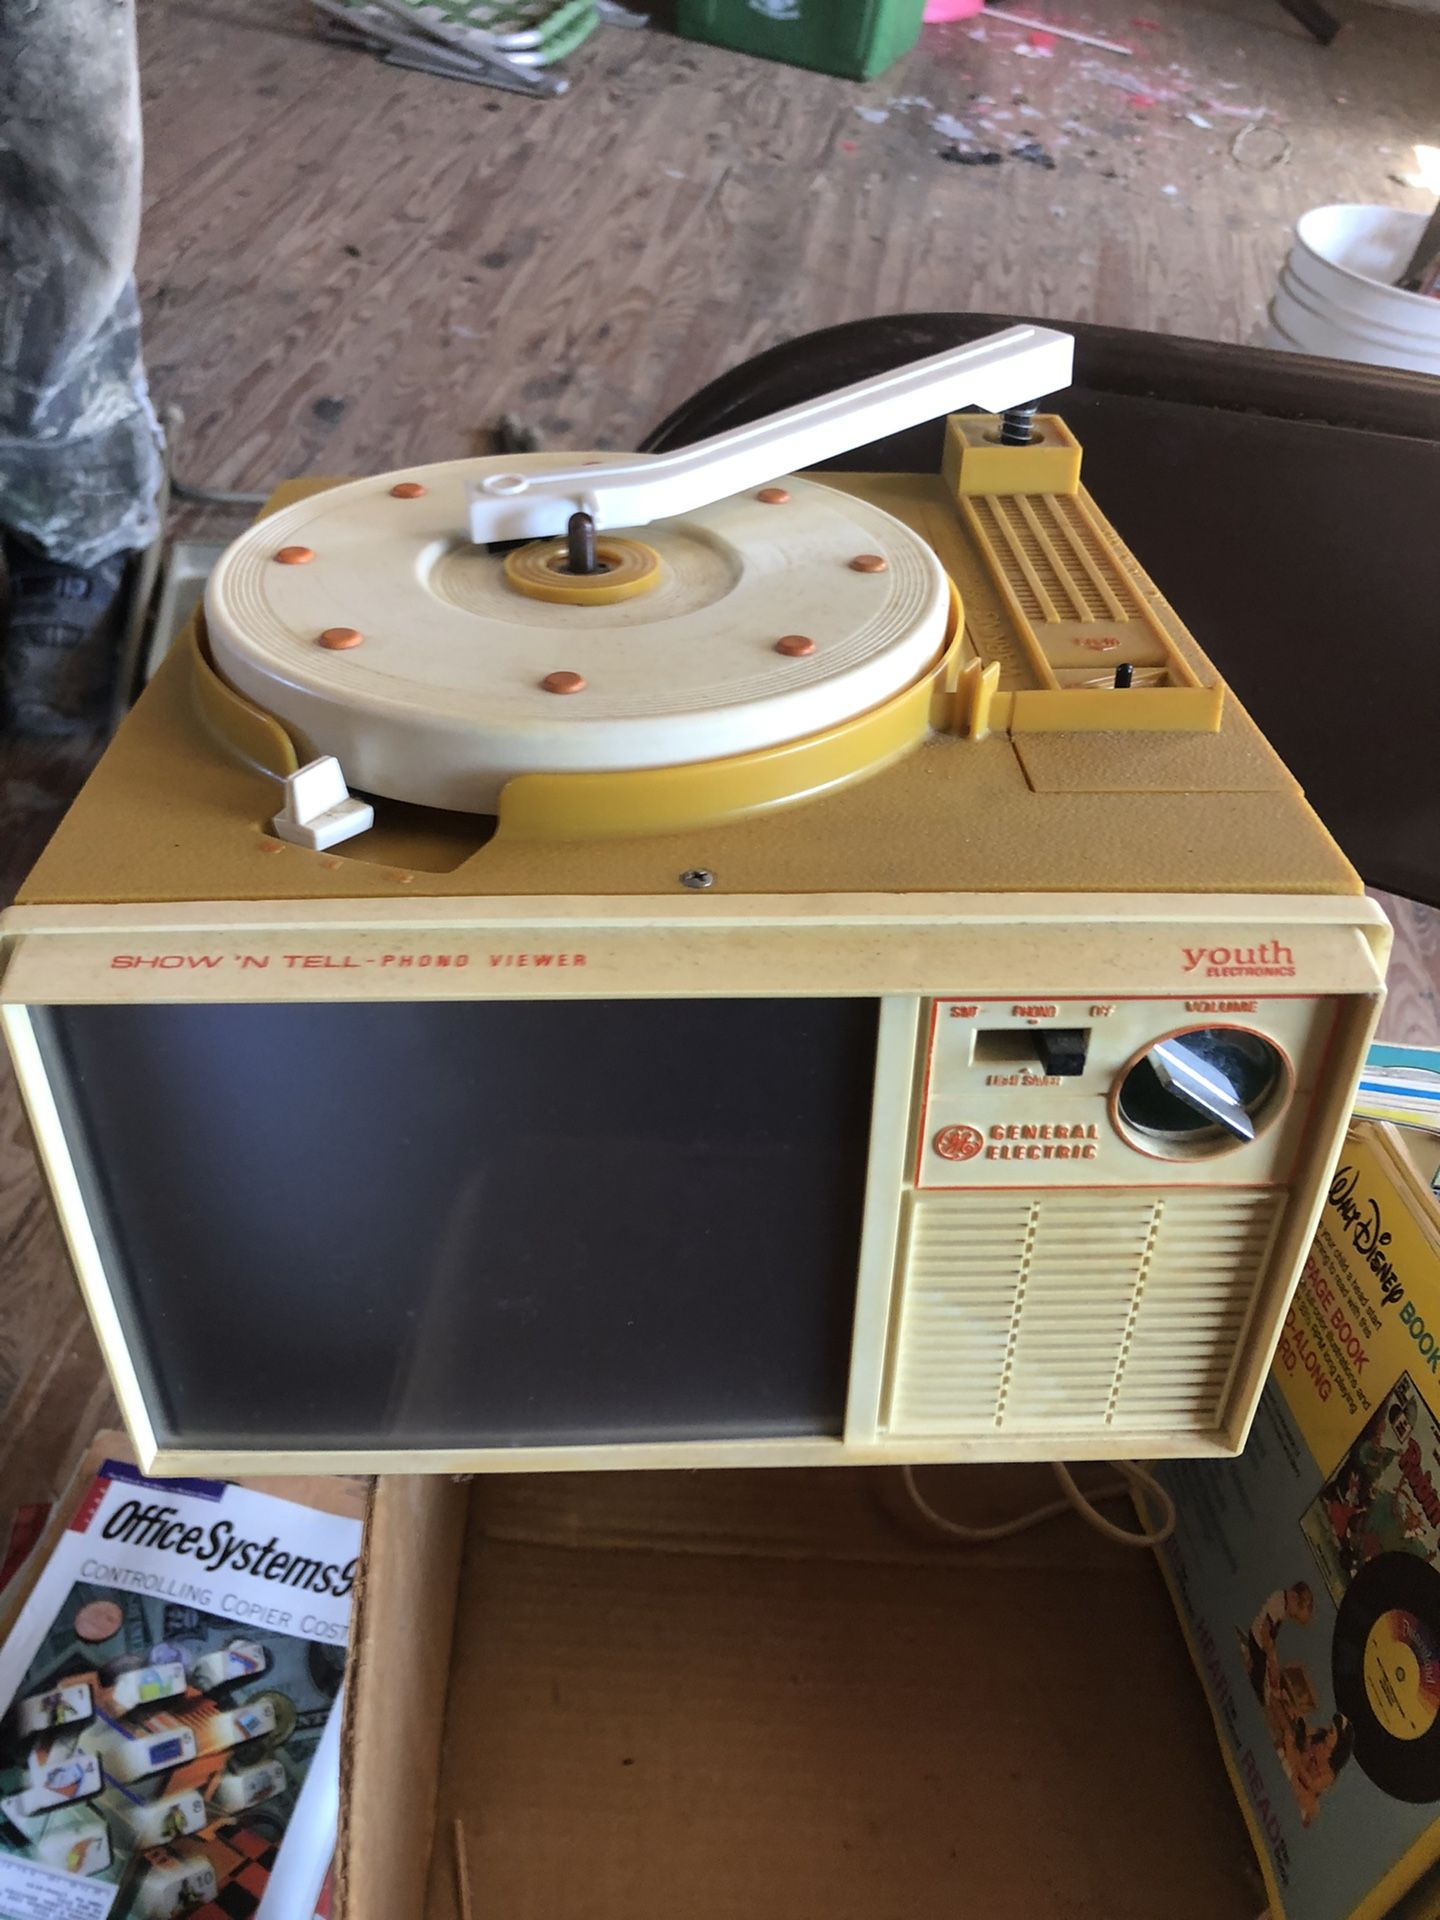 1960s GE Show N Tell Phono Viewer Toy